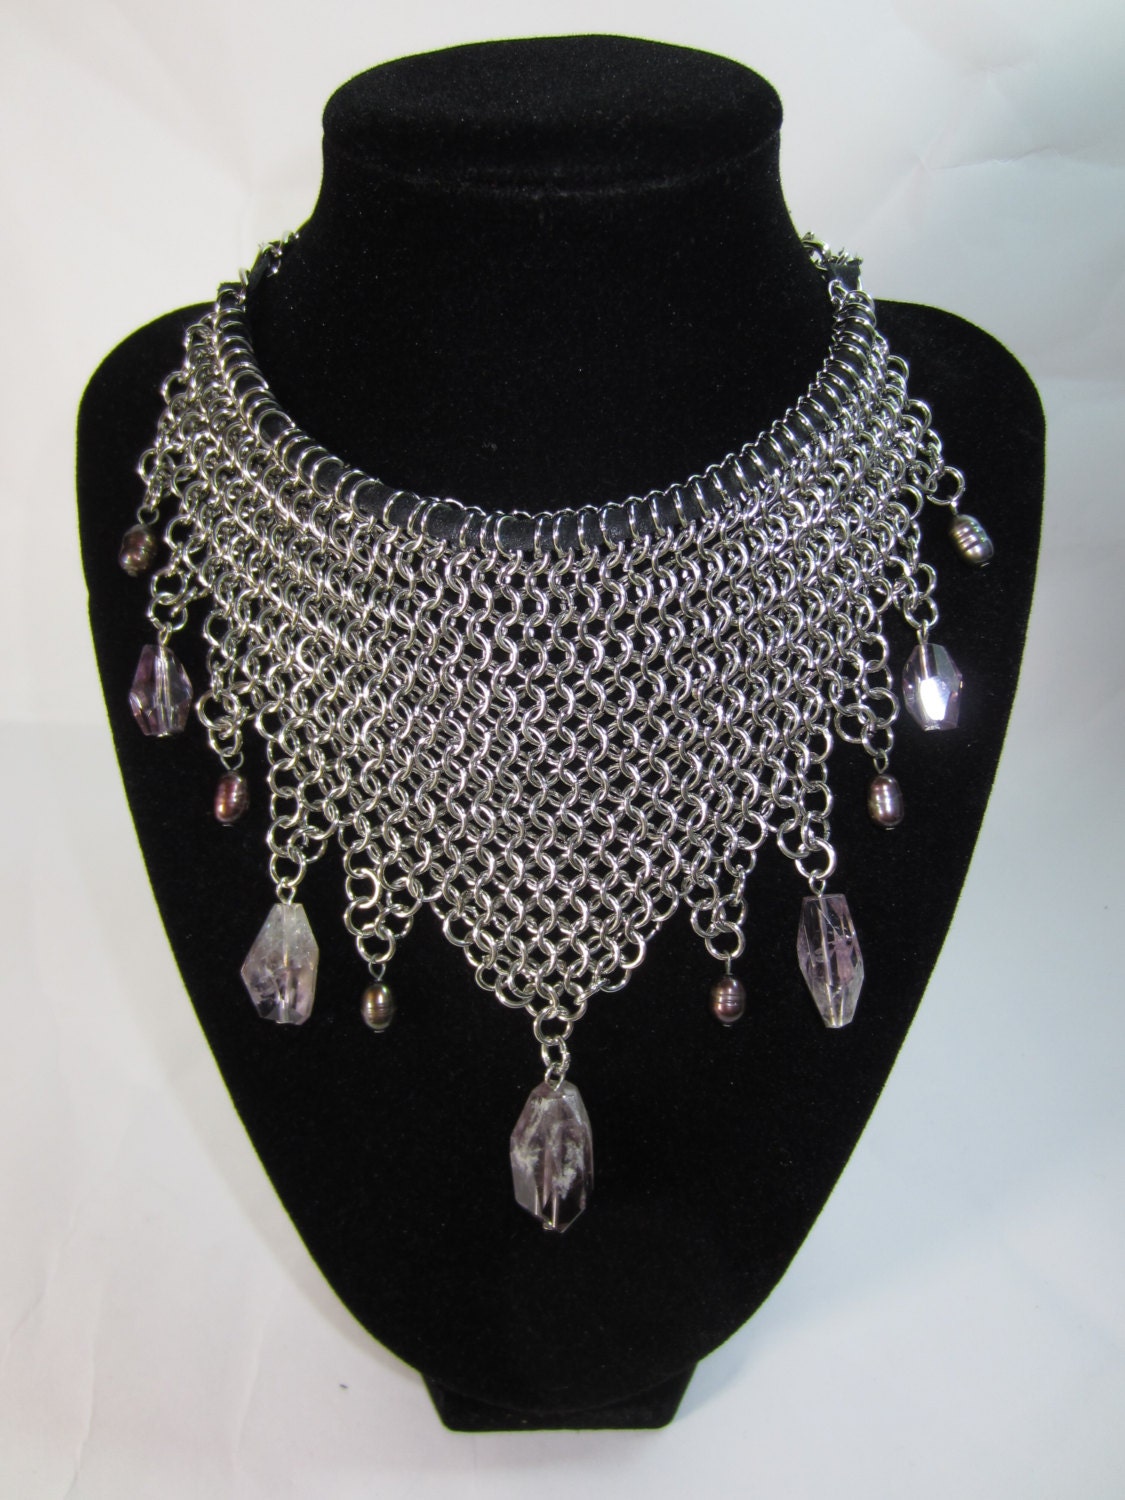 Amethyst ChainMaille Necklace Bohemian Jewelry Silver Chain